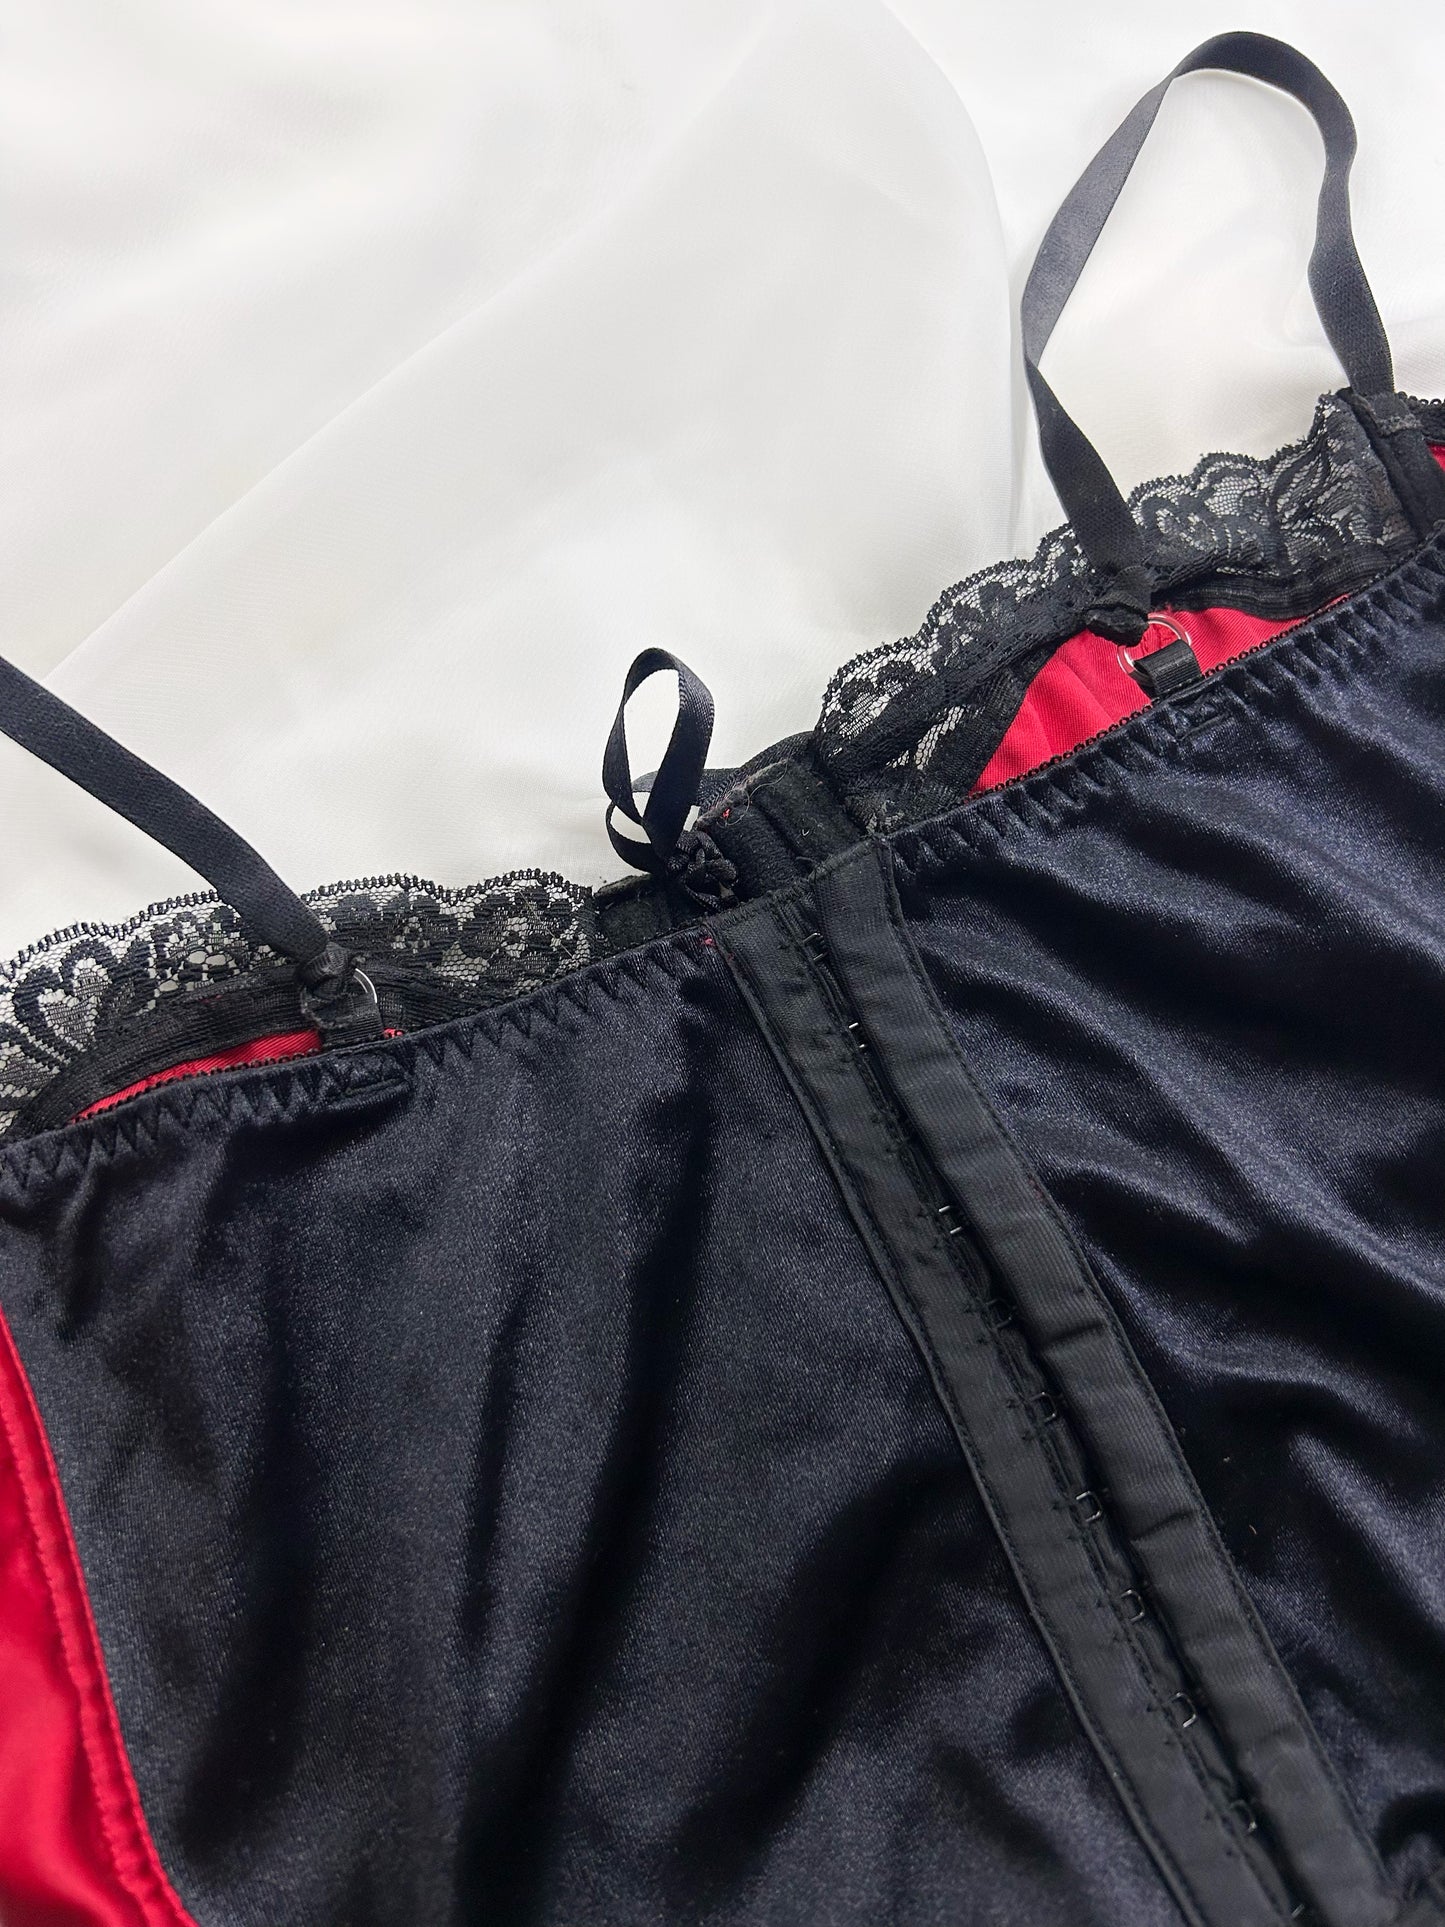 Frederick of Hollywood Black Red Bustier